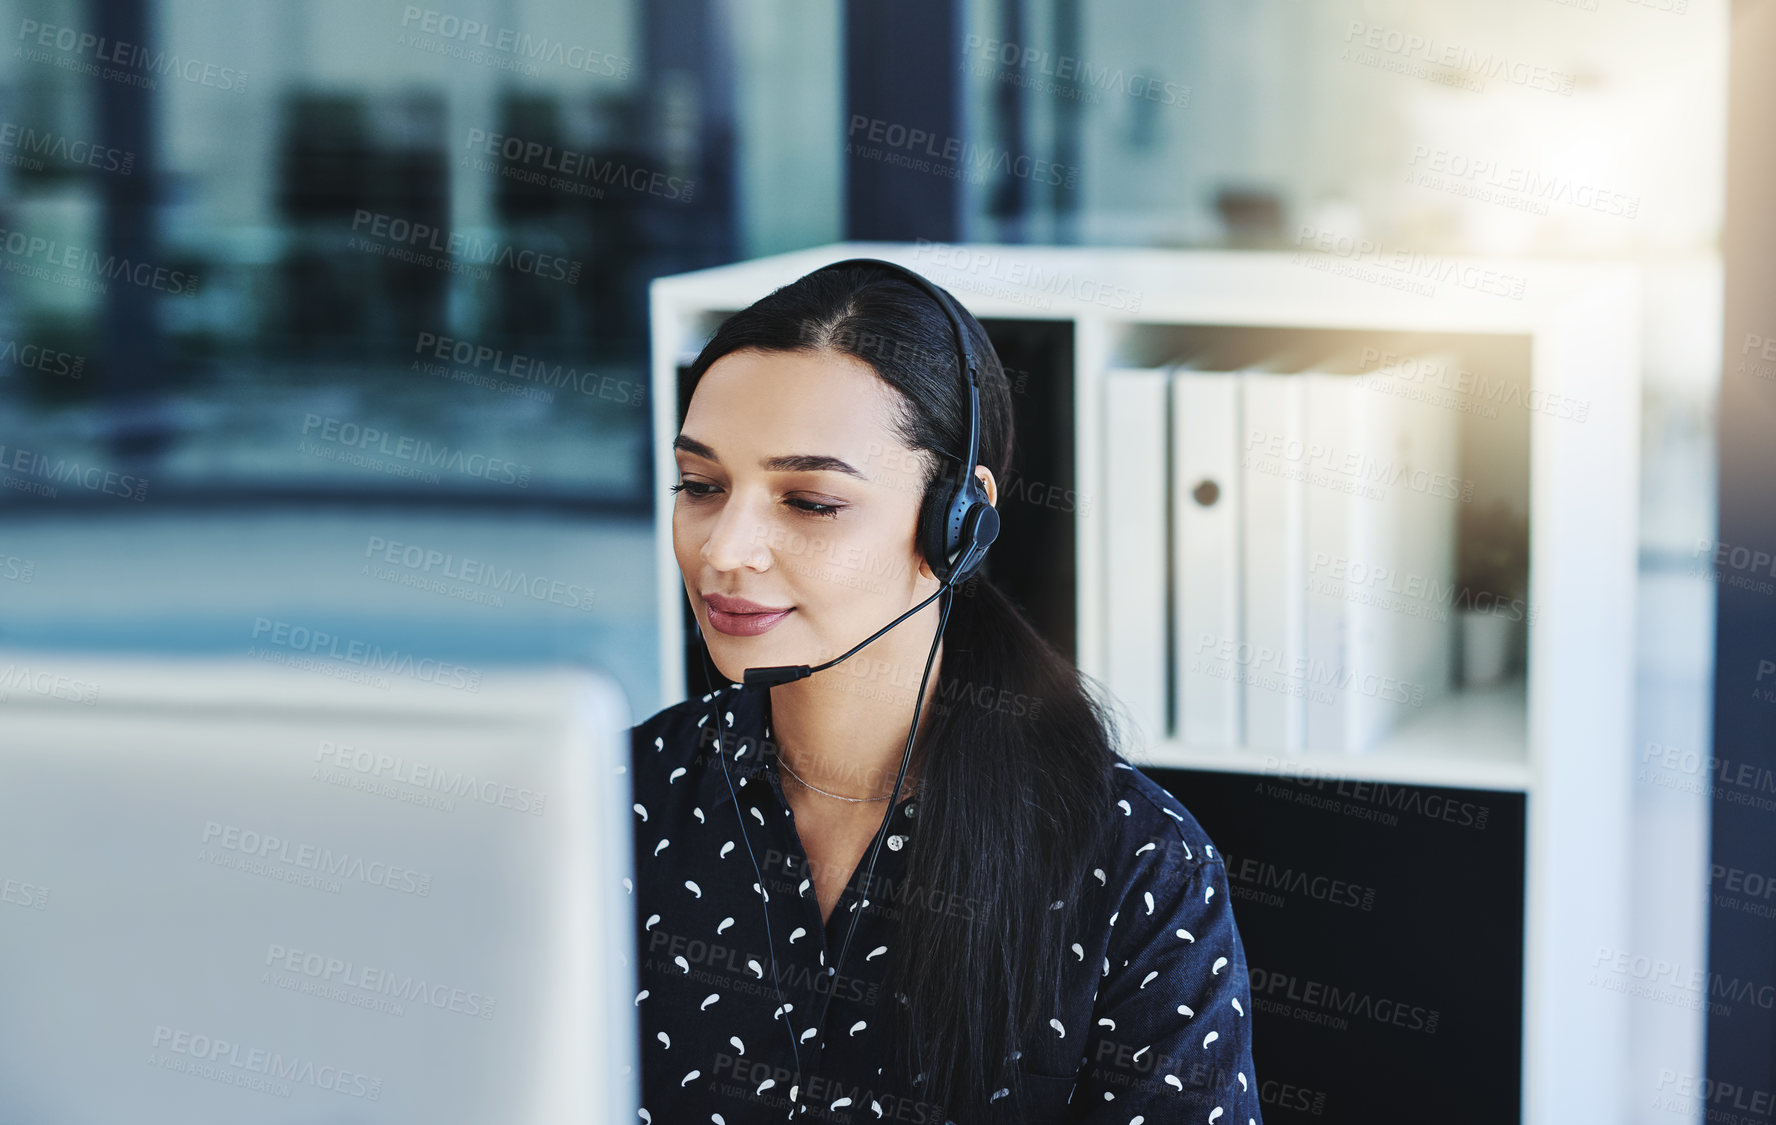 Buy stock photo Cropped shot of an attractive young businesswoman wearing a headset and using her computer while sitting in the office alone